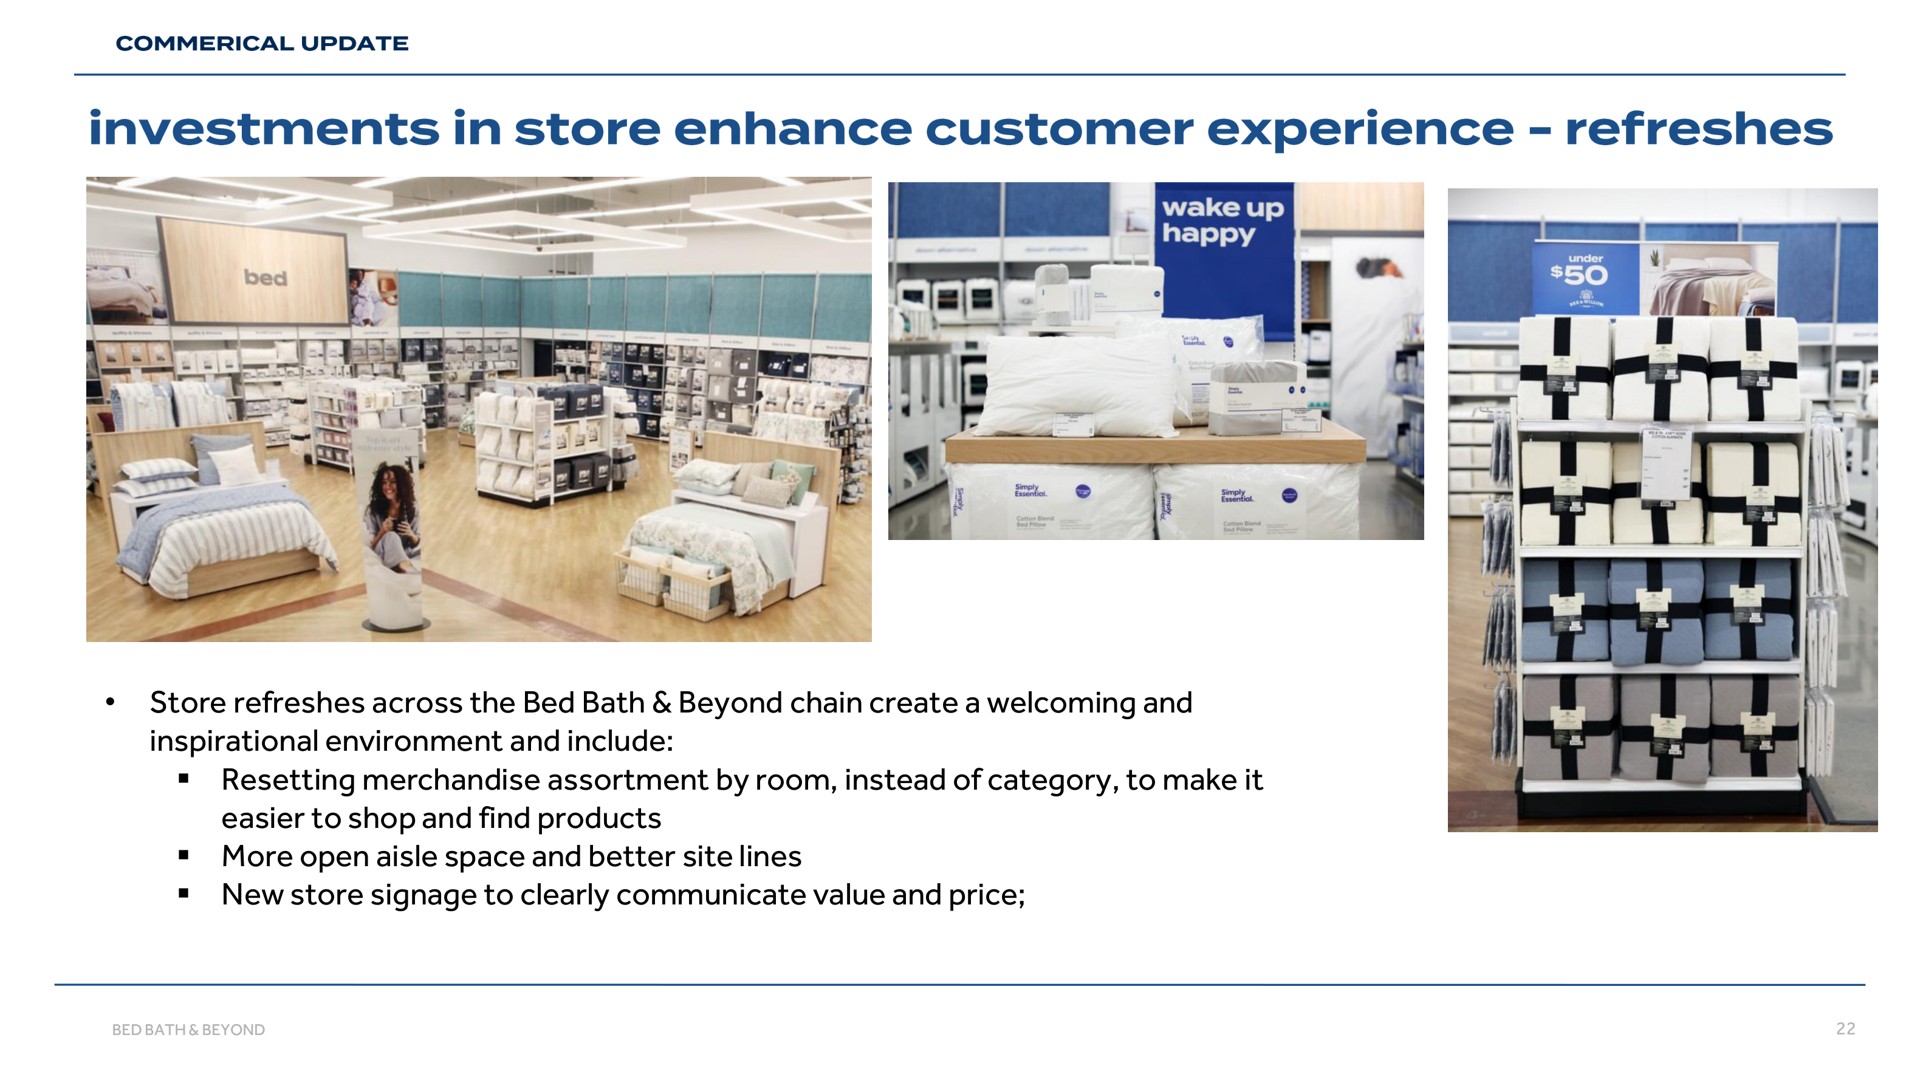 store refreshes across the bed bath beyond chain create a welcoming and inspirational environment and include resetting merchandise assortment by room instead of category to make it easier to shop and find products more open aisle space and better site lines new store to clearly communicate value and price investments in enhance customer experience | Bed Bath & Beyond